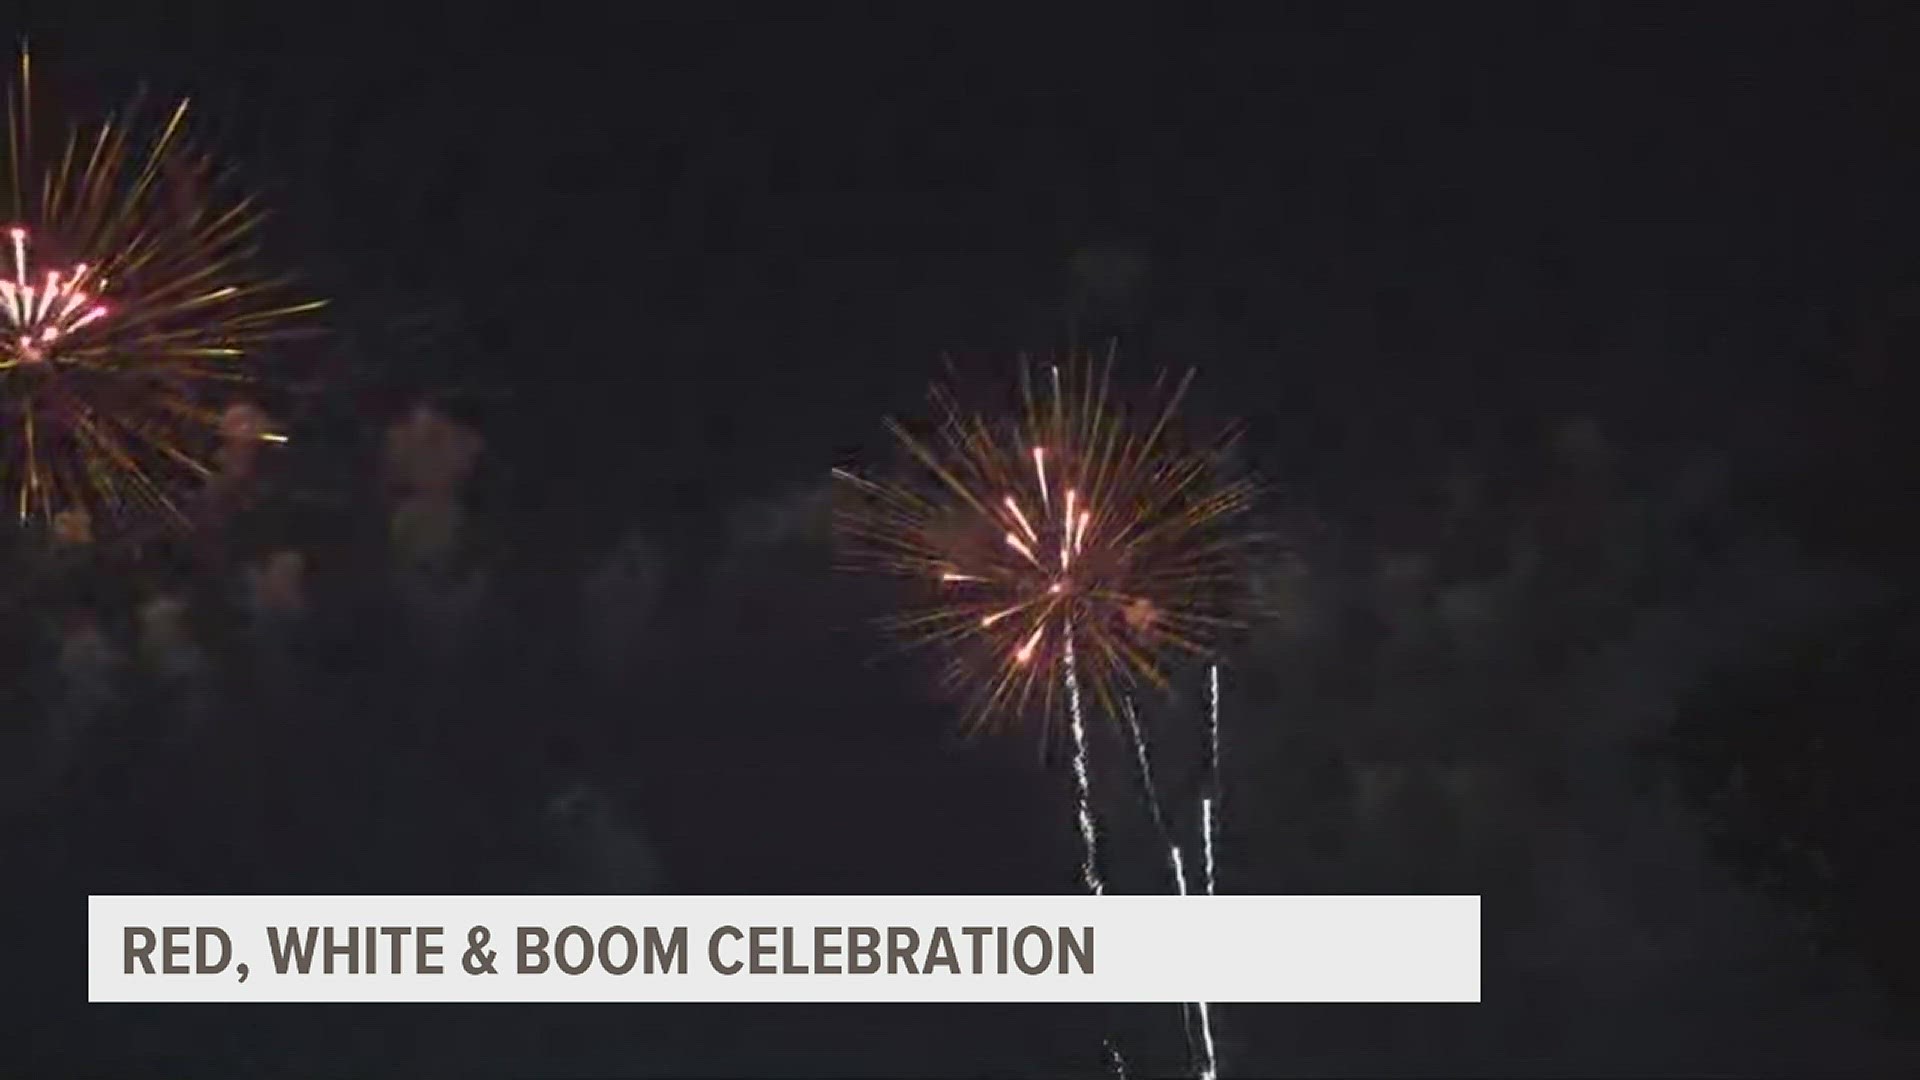 Hundreds of people attended the annual event and fireworks show.